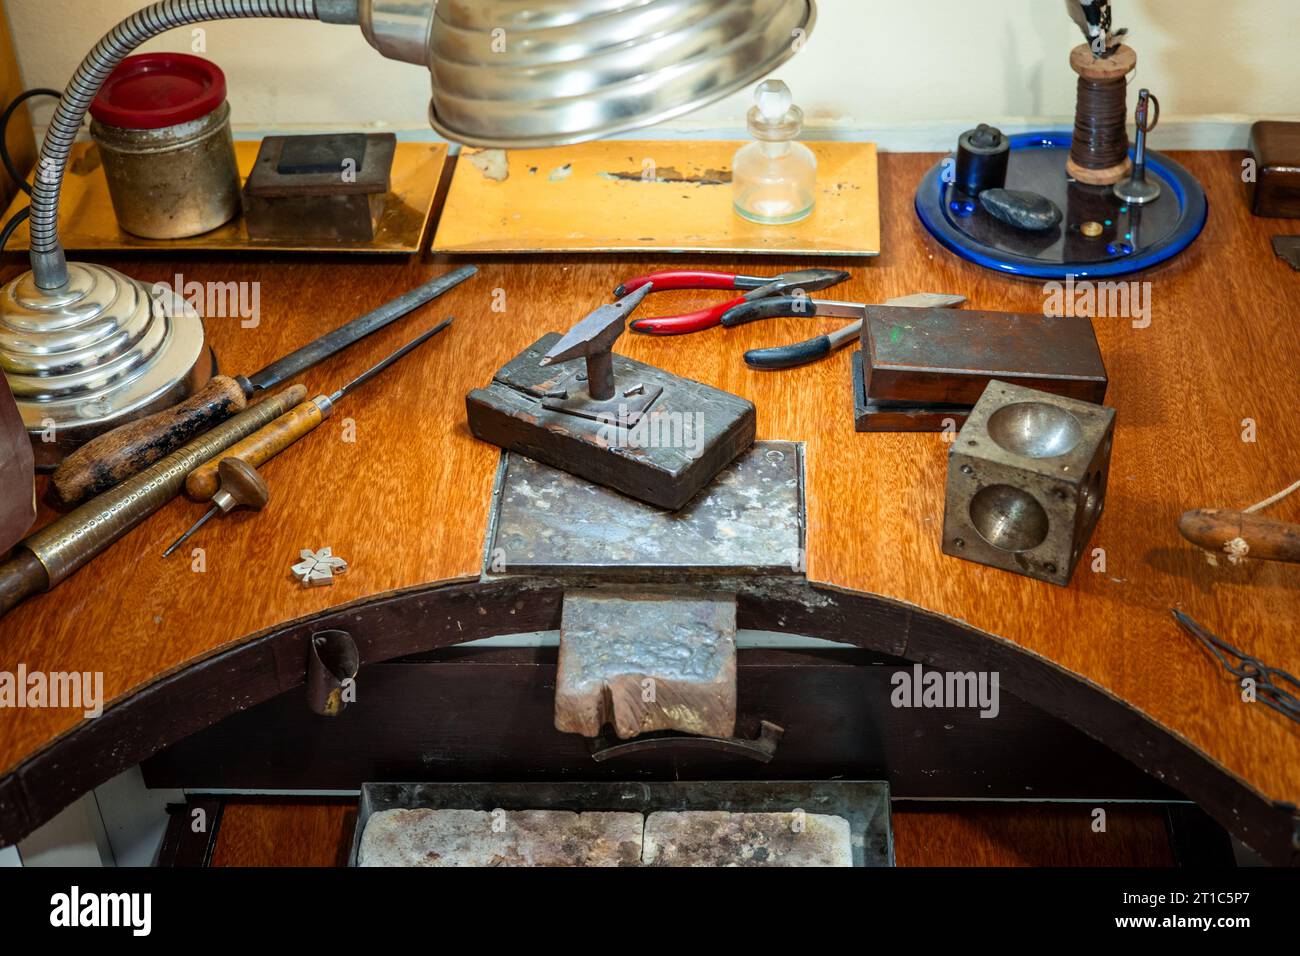 Craft workplace of a jeweler. Jewelry tools and equipment on a goldsmith wooden desk table. Stock Photo